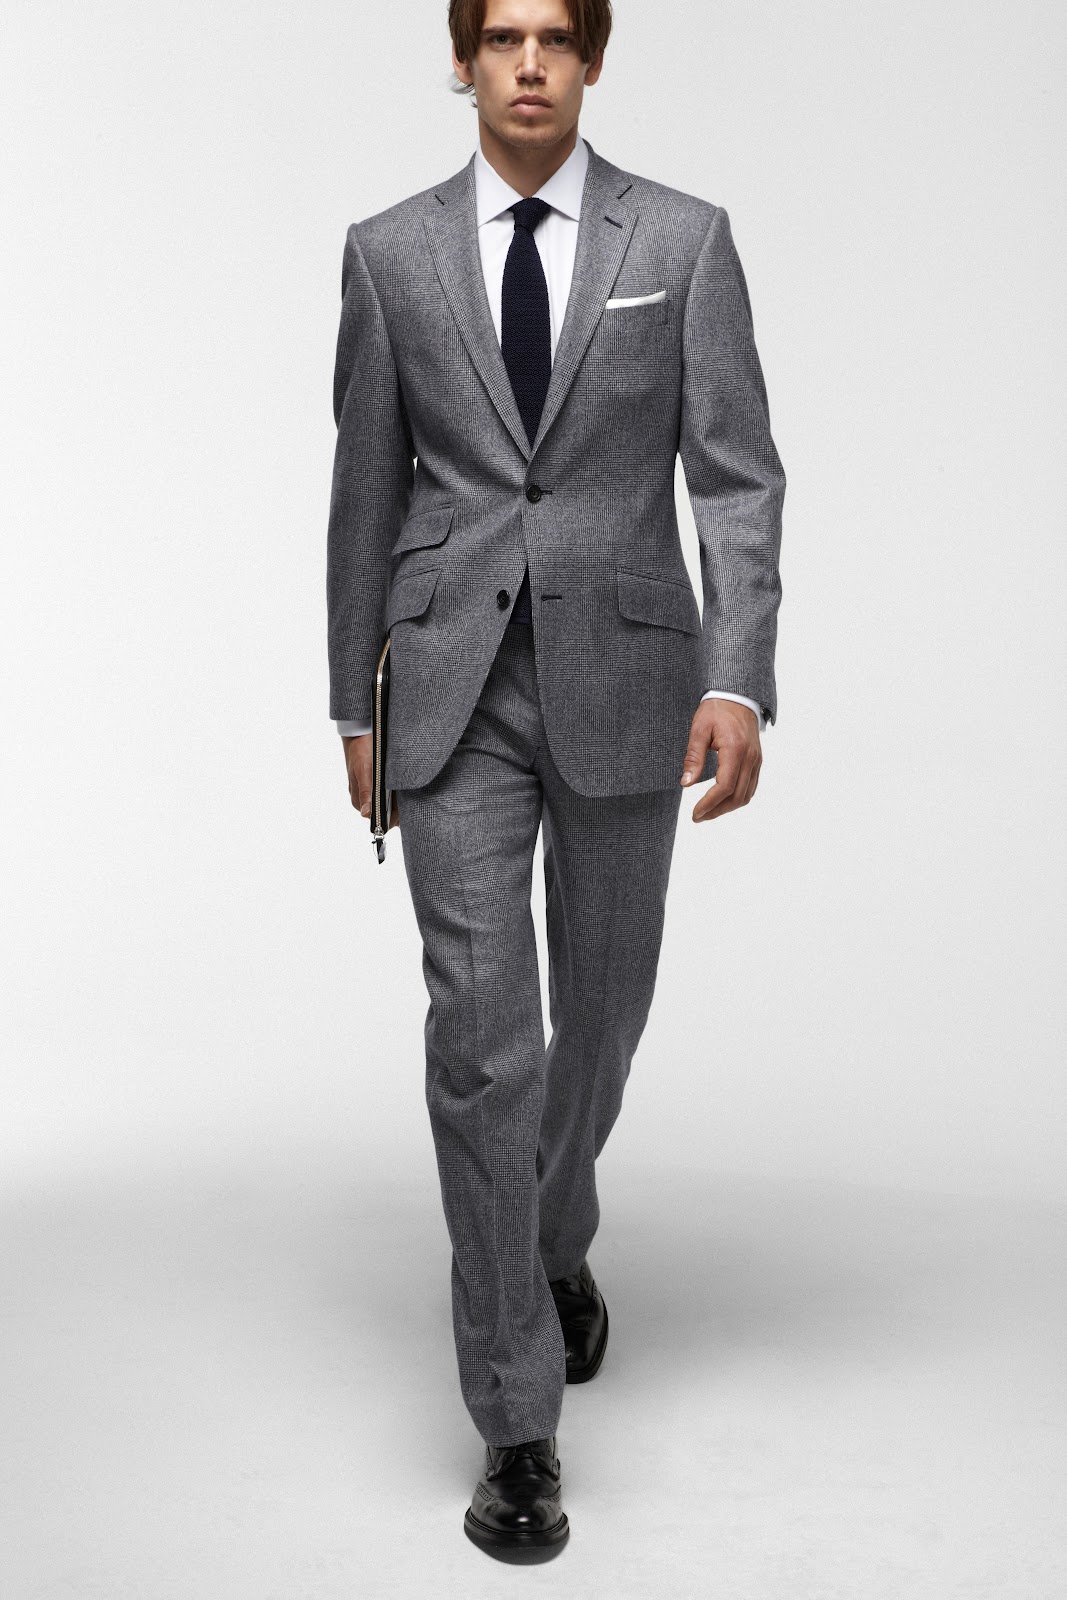 USA Network + Mr. Porter.com Present: Suits and Style | Exclusive Kat